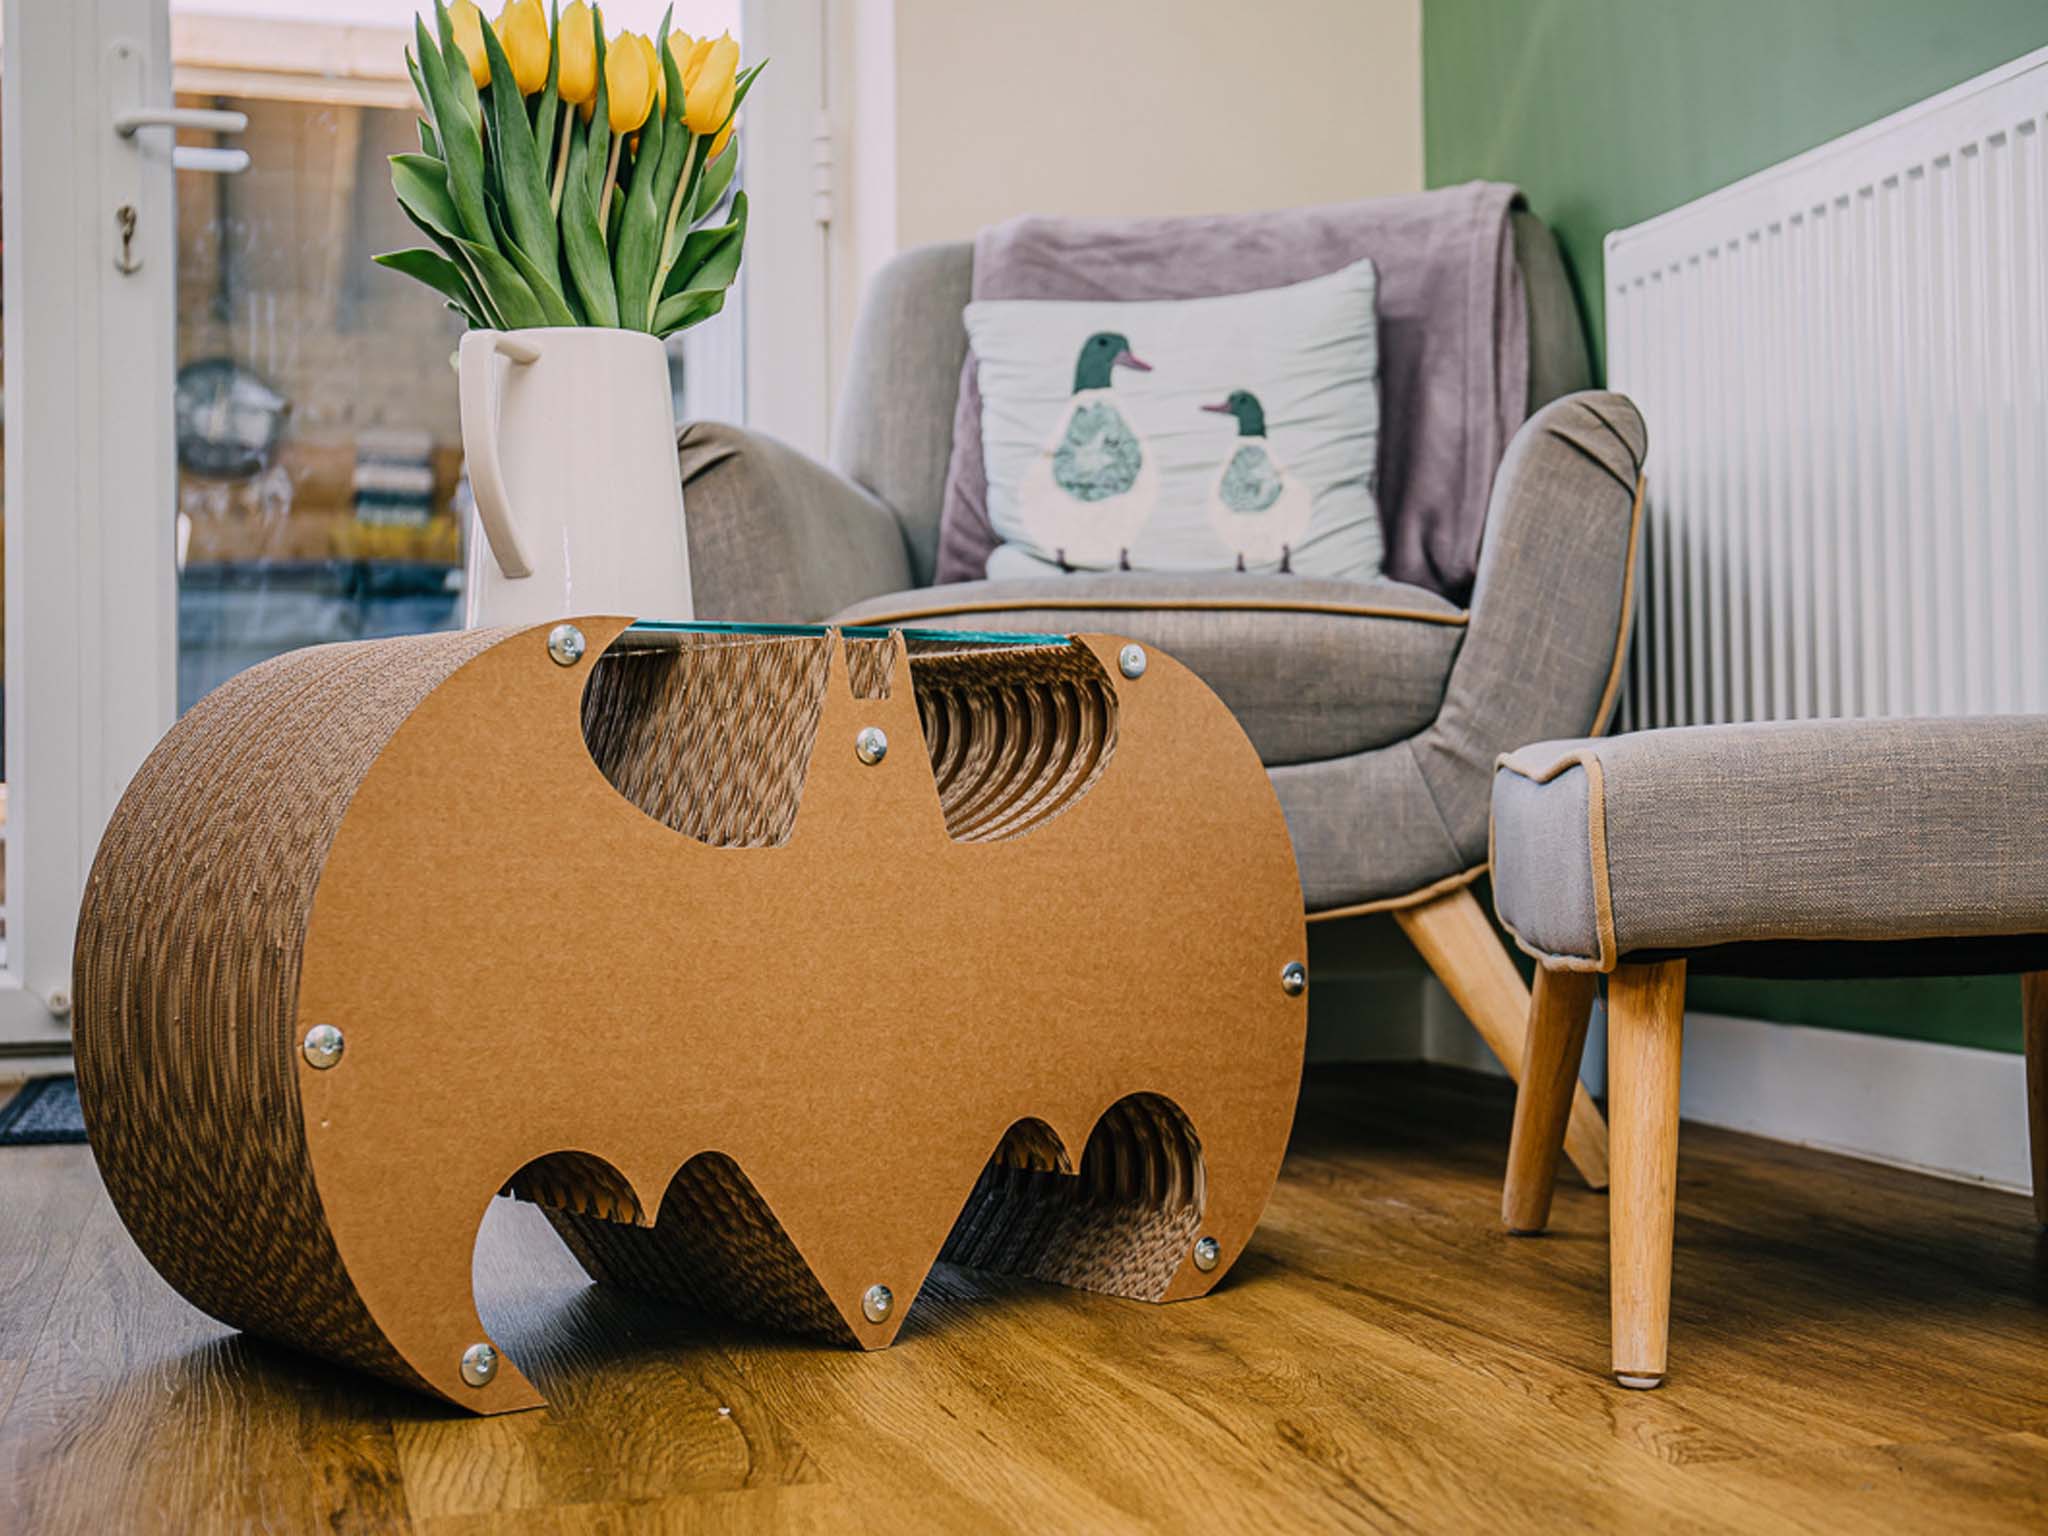 ROOM IN A BOX - Sustainable Furniture